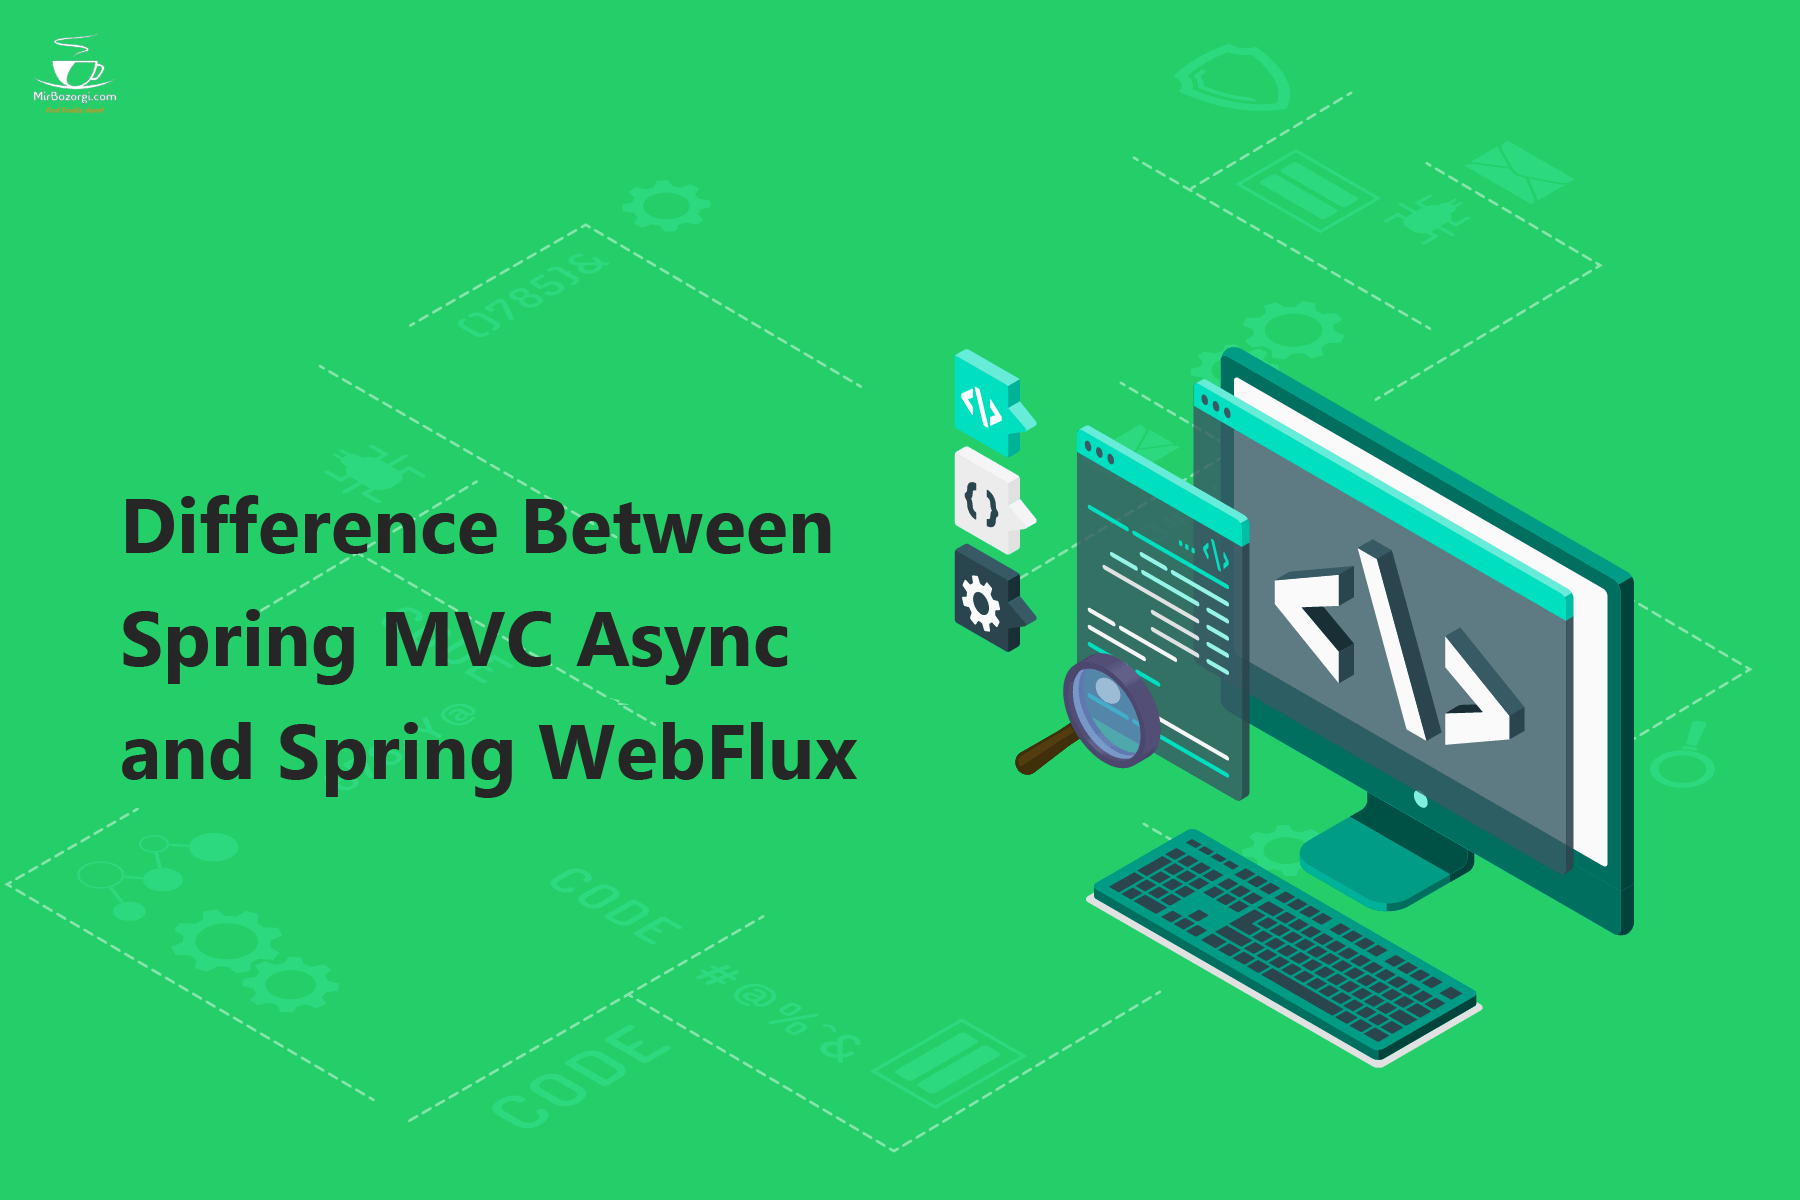 Difference Between Spring MVC Async and Spring WebFlux